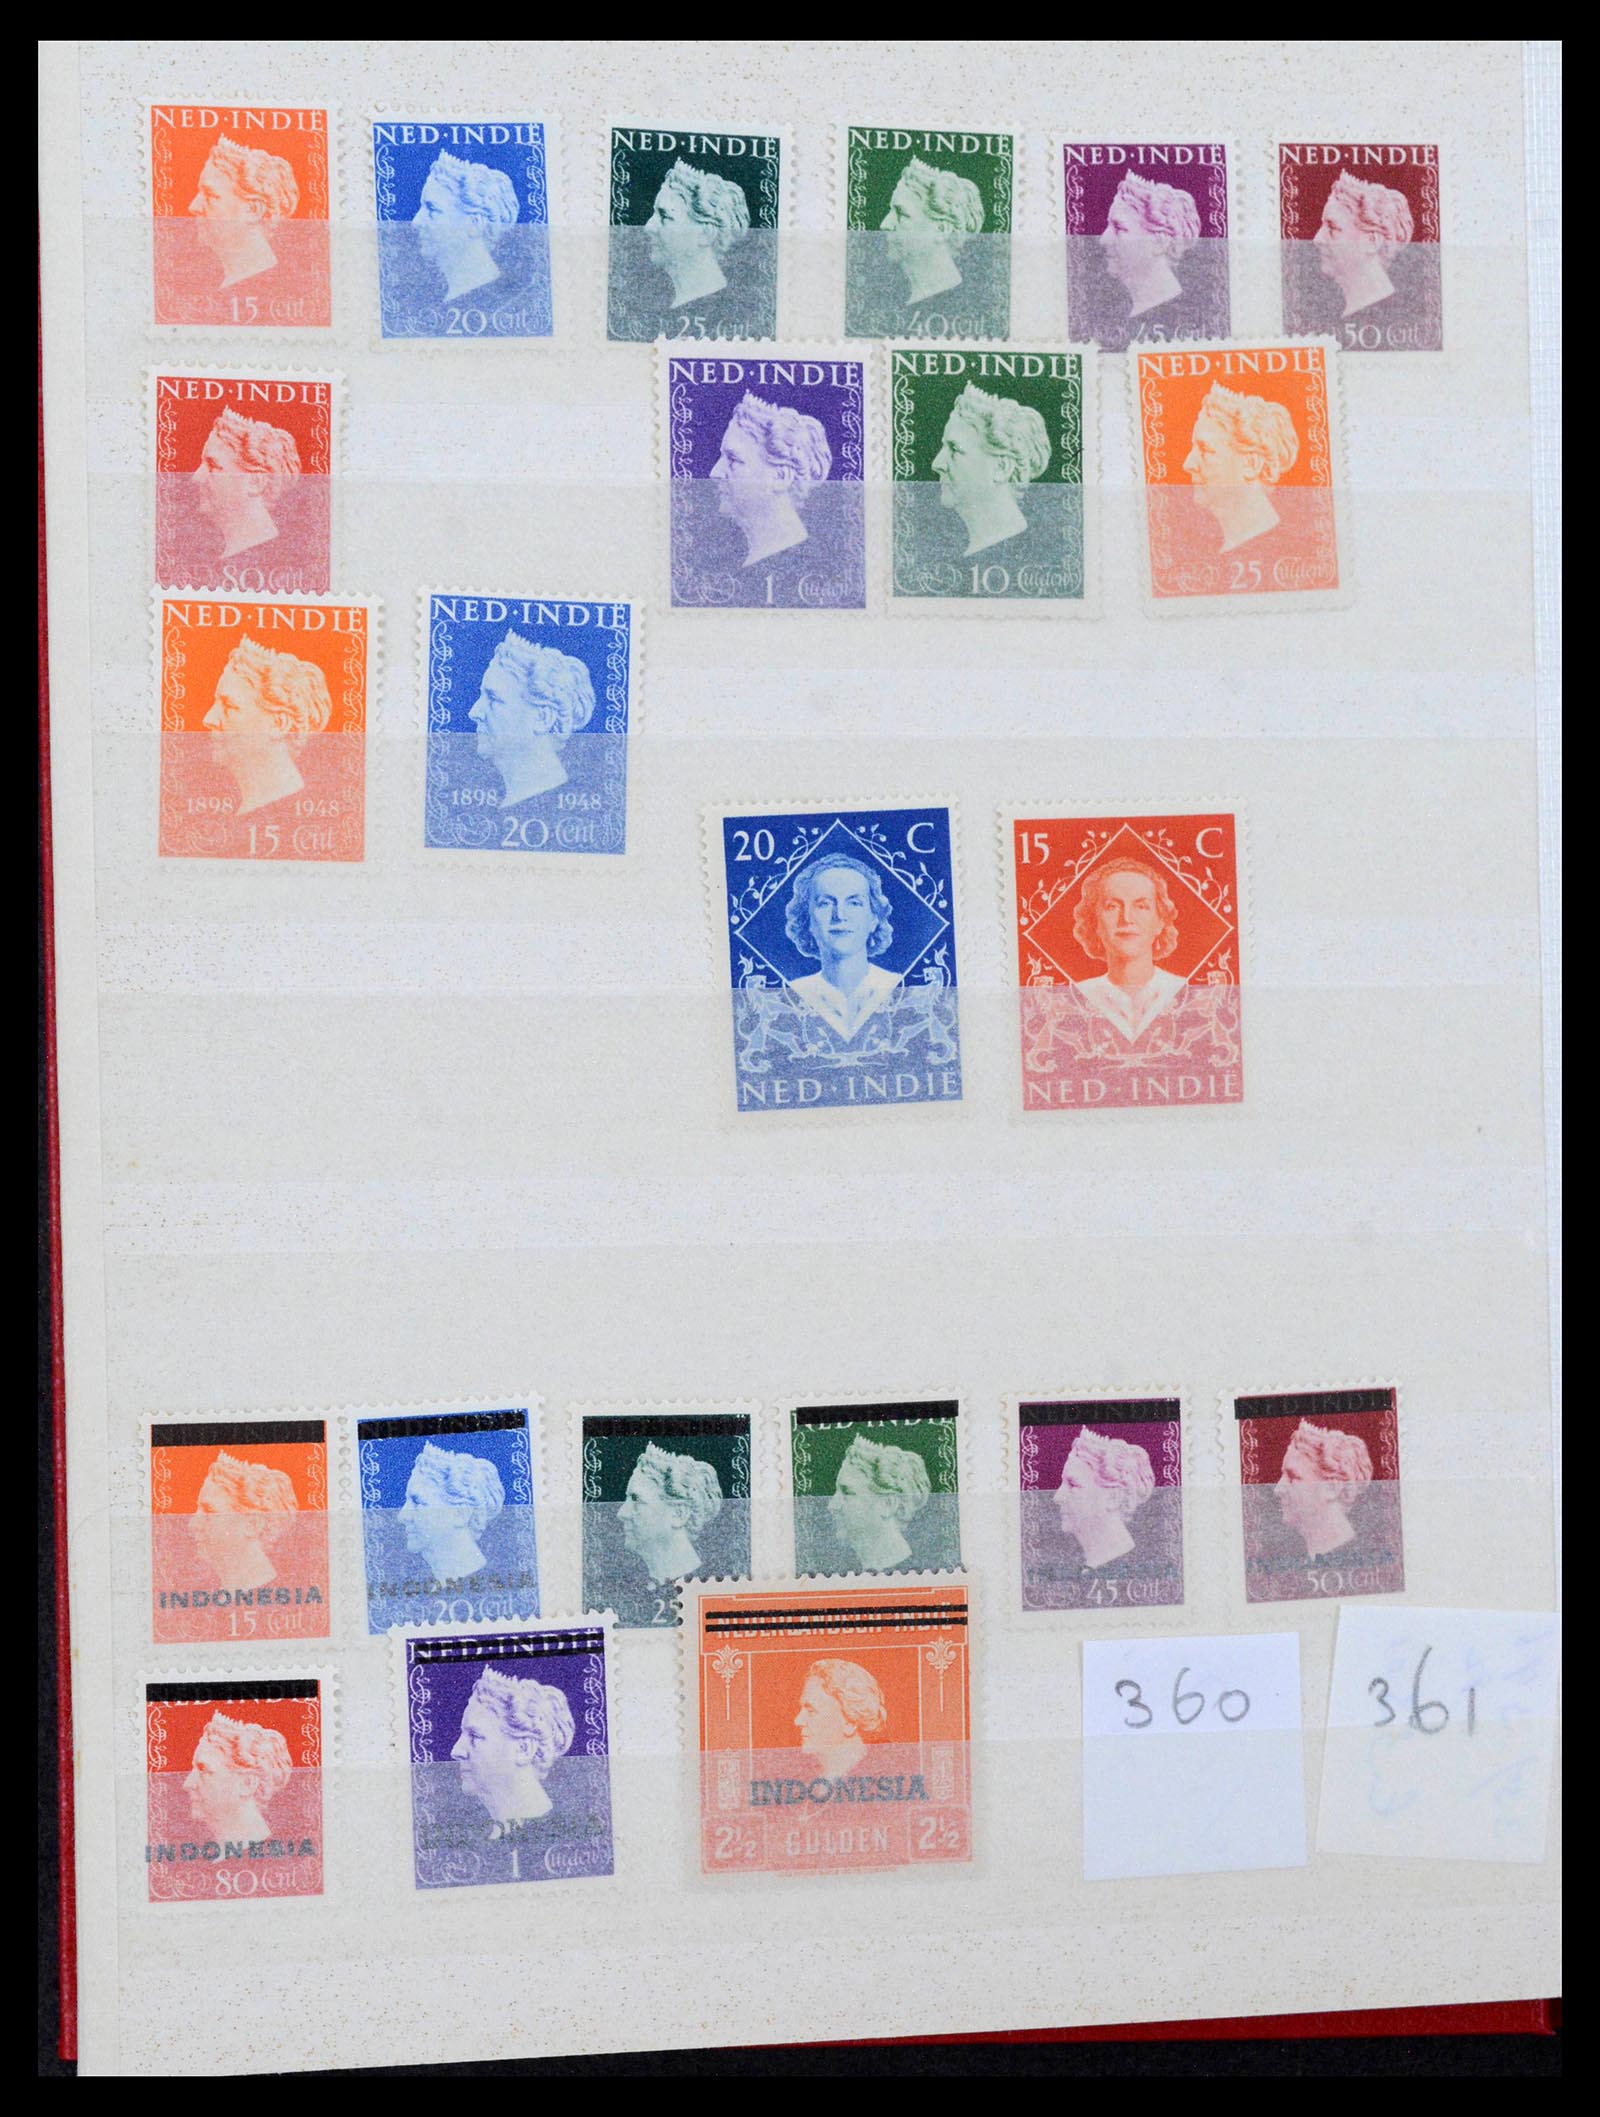 39359 0012 - Stamp collection 39359 Dutch east Indies 1864-1948.